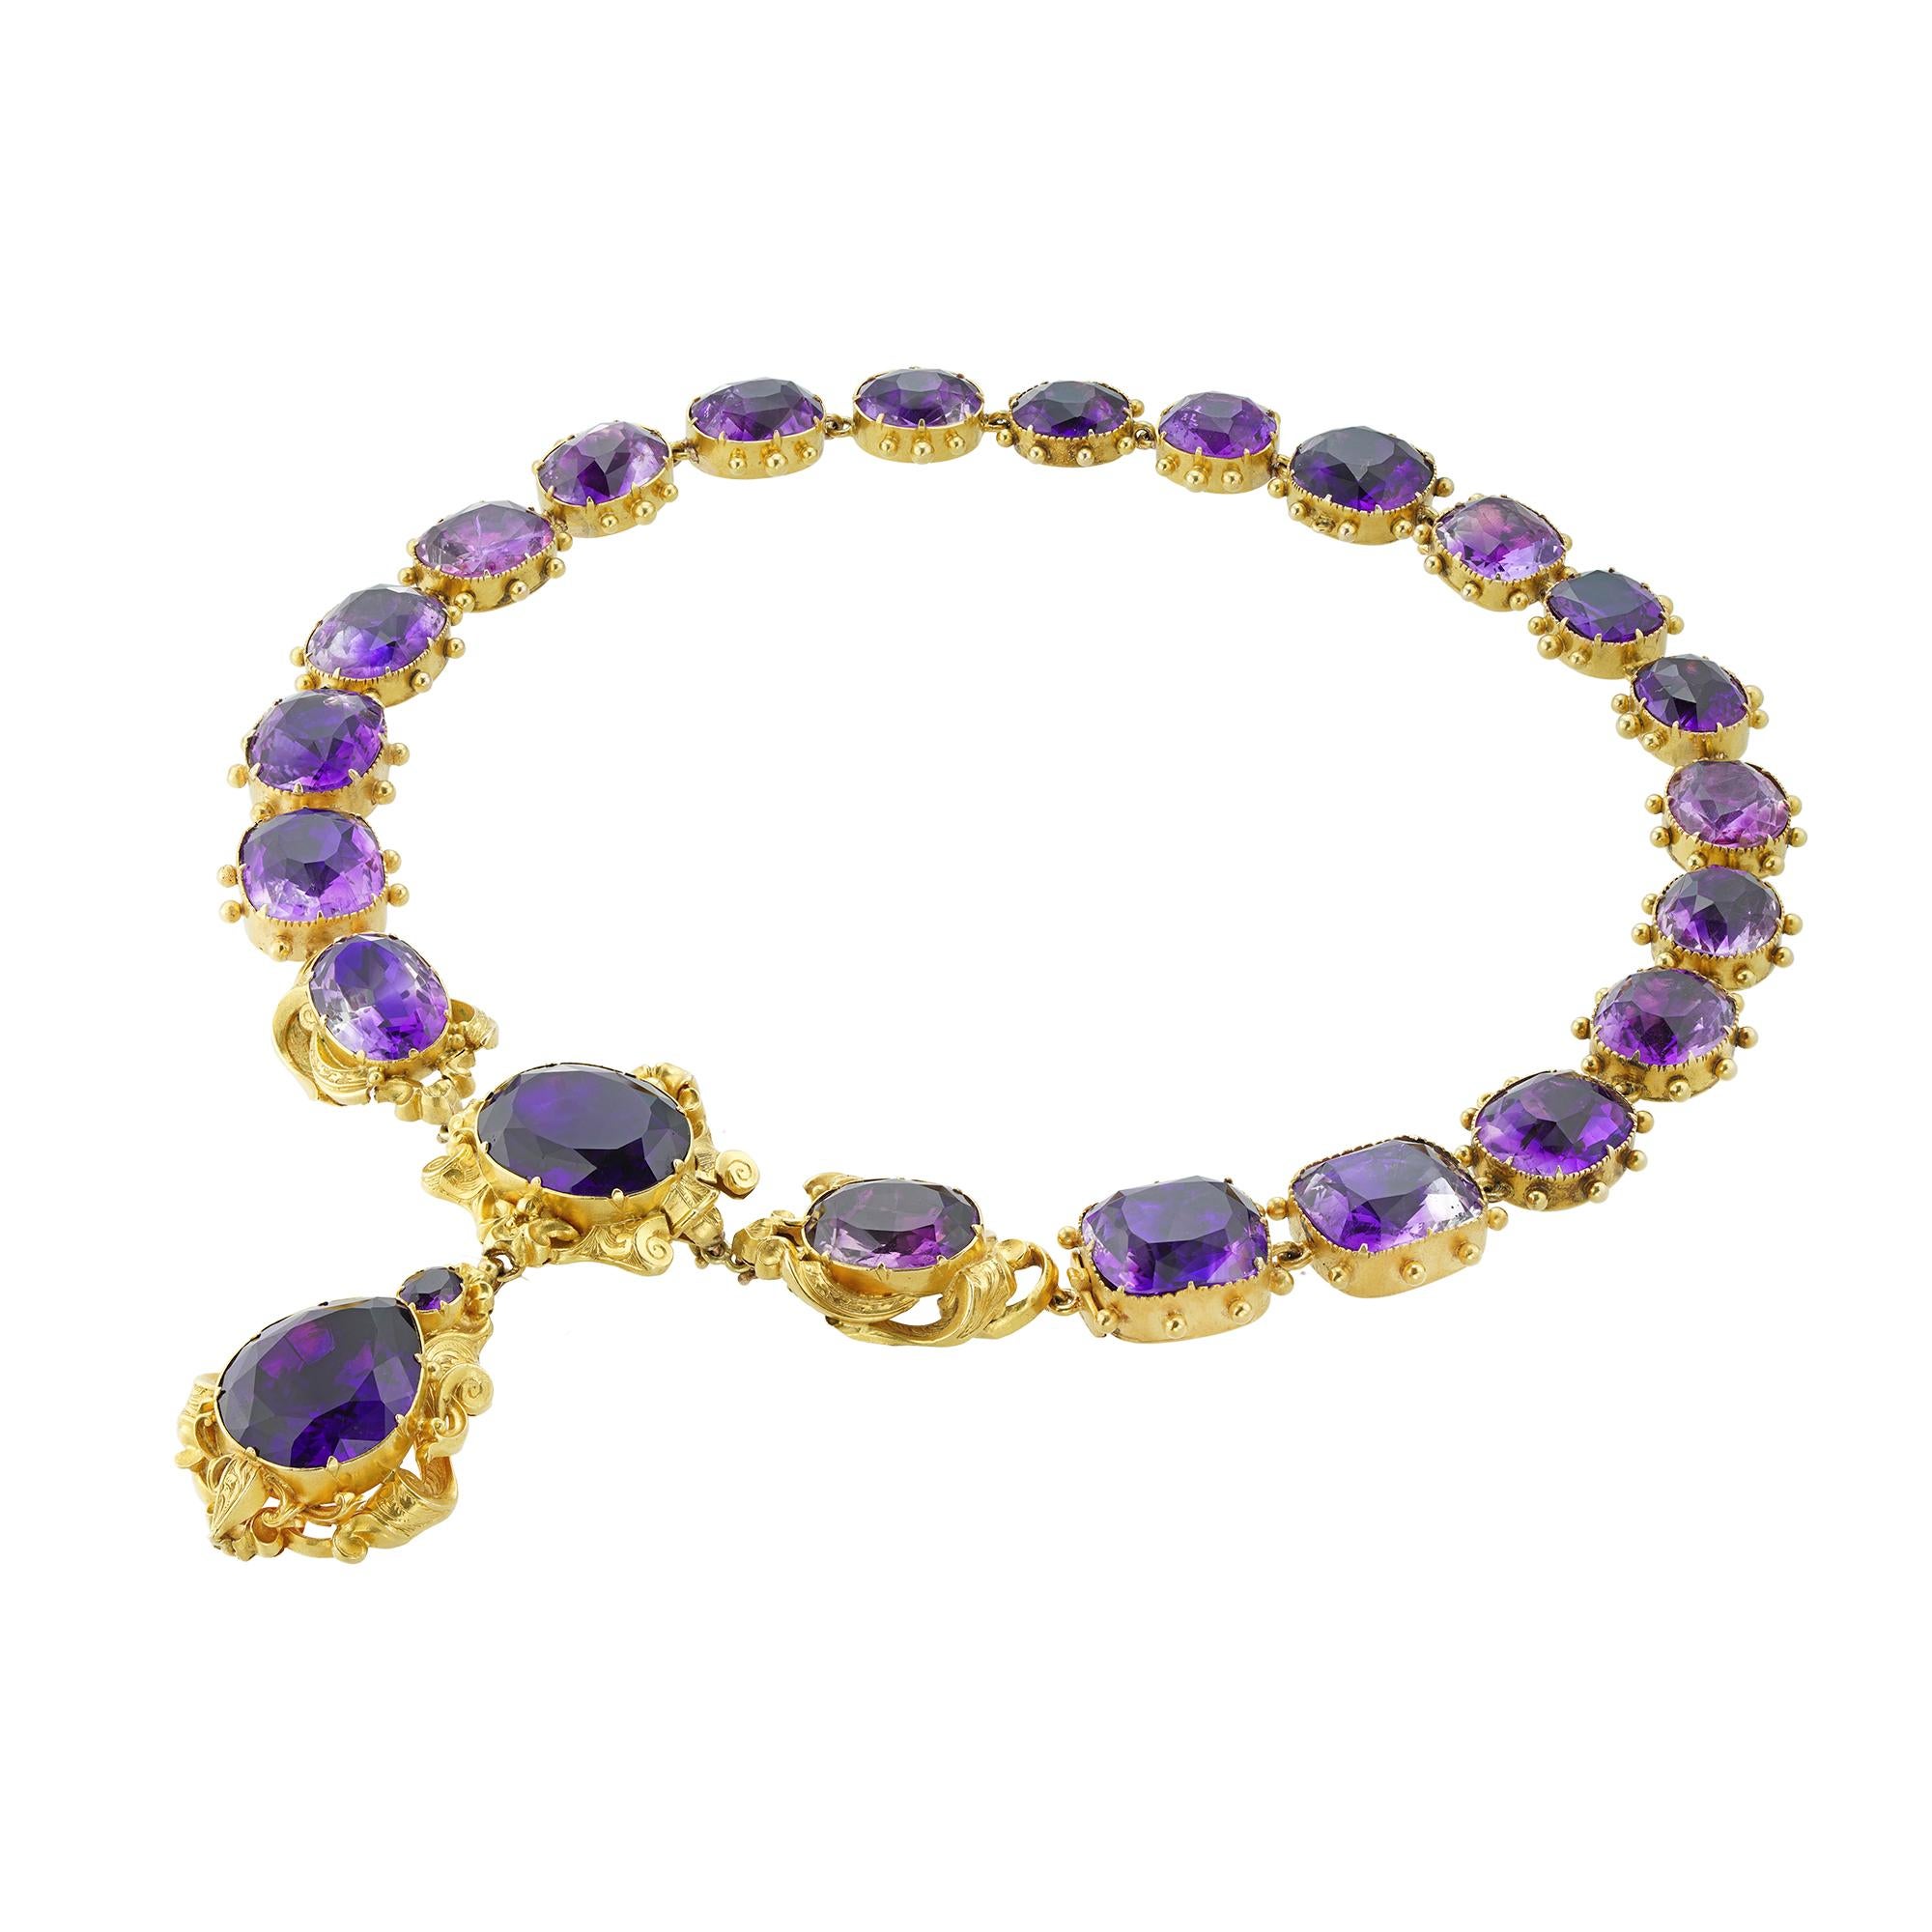 A late Georgian amethyst suite, the necklace centrally set with three oval faceted amethysts within gold scroll decorations, suspending a detachable drop with a pear-shaped and a small oval amethyst on a similar surround, attached to nineteen